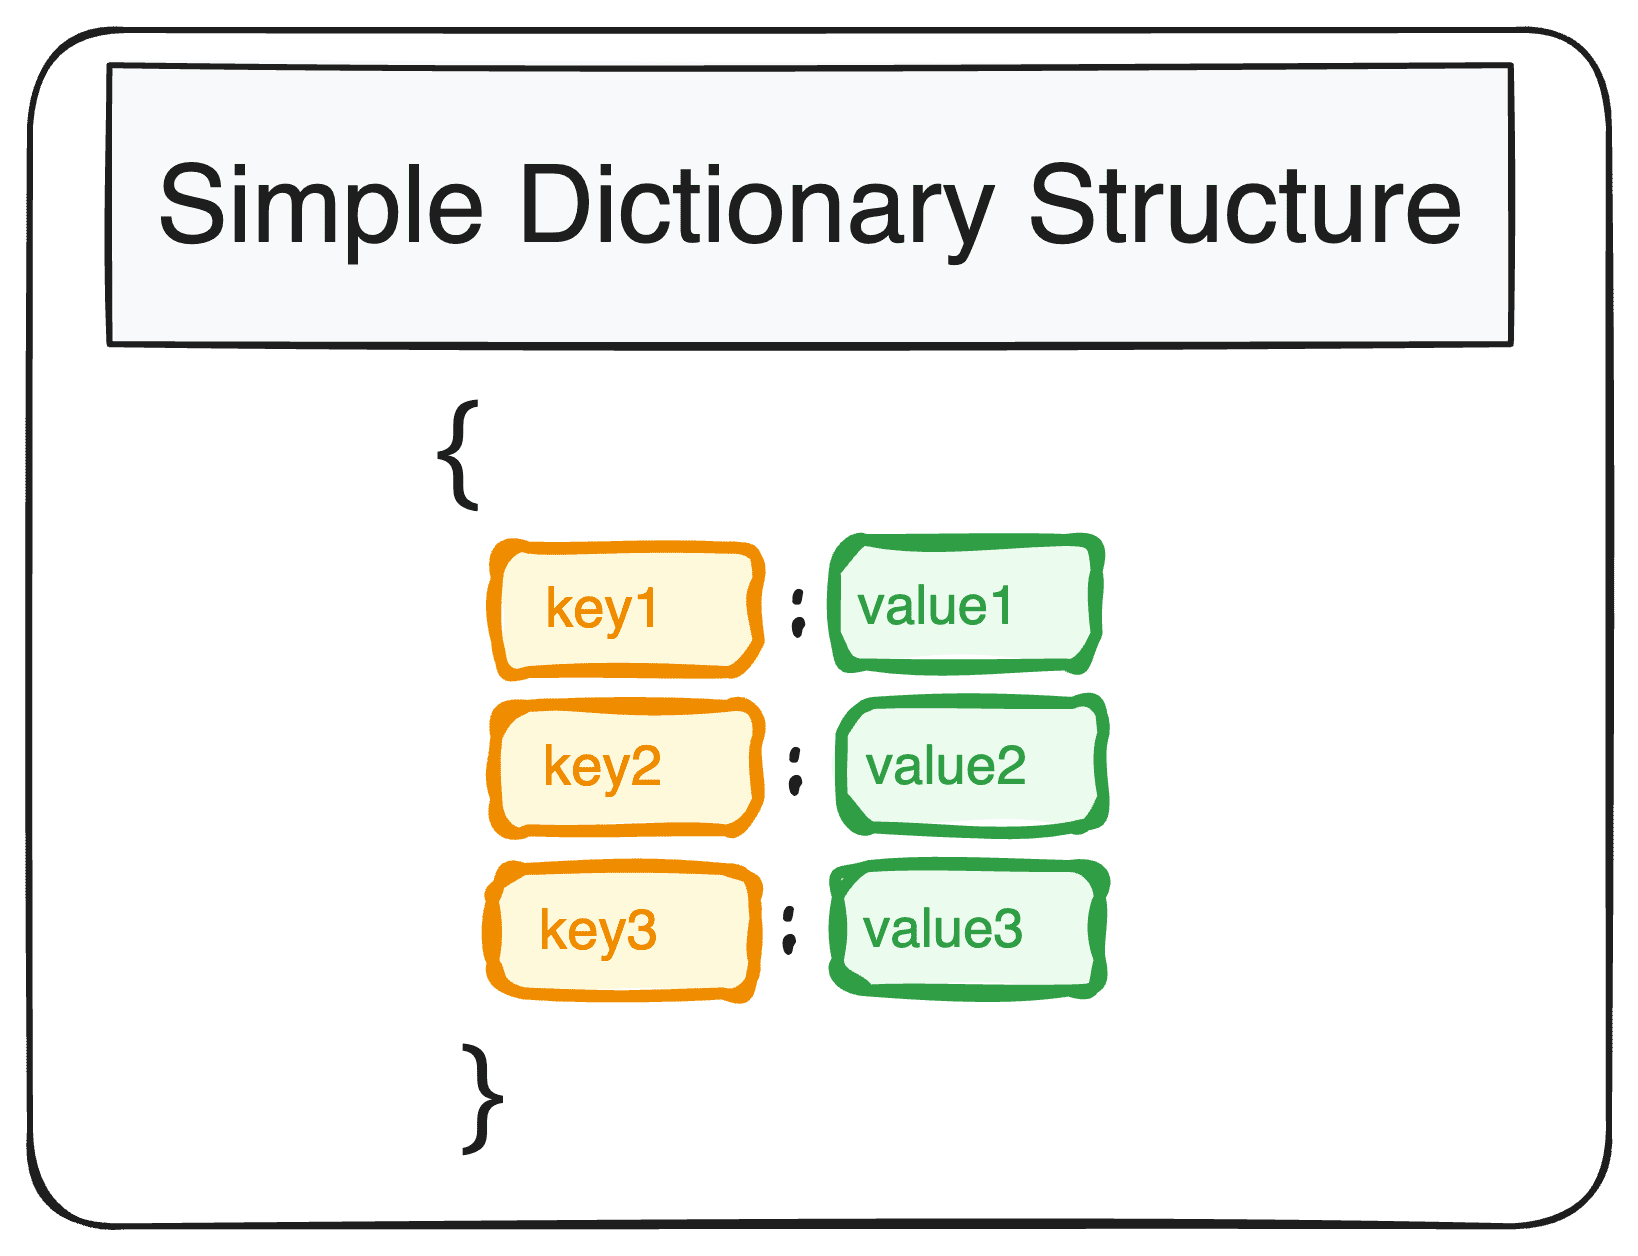 The correct way to access dictionaries in Python